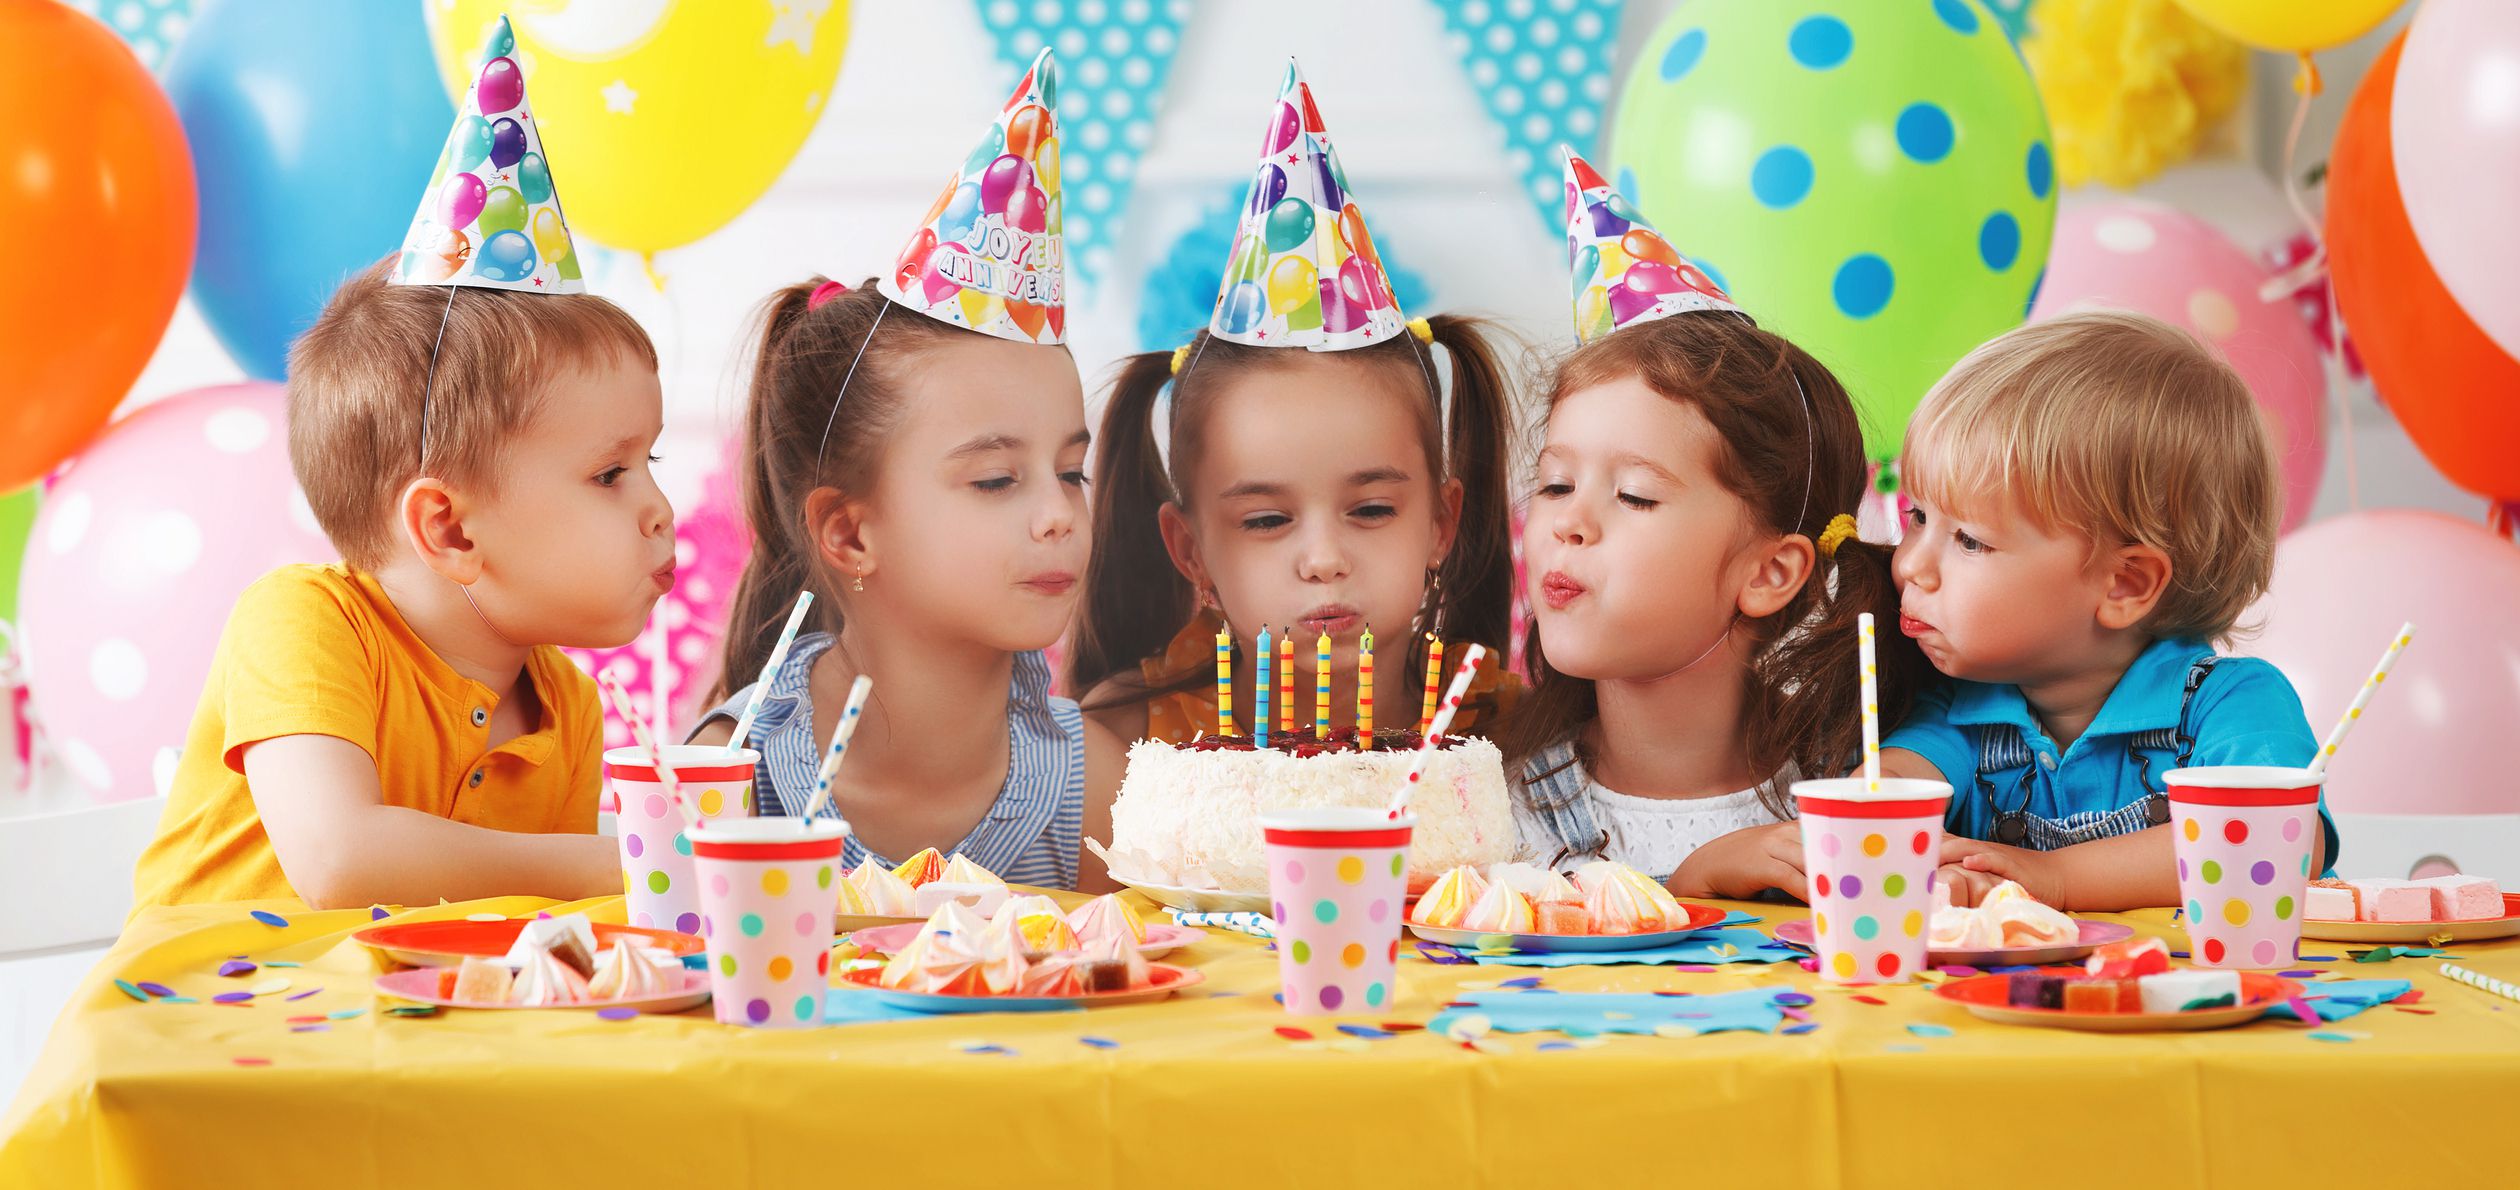 Birthday Party Organisers in Delhi India | Birthday Party Event Services